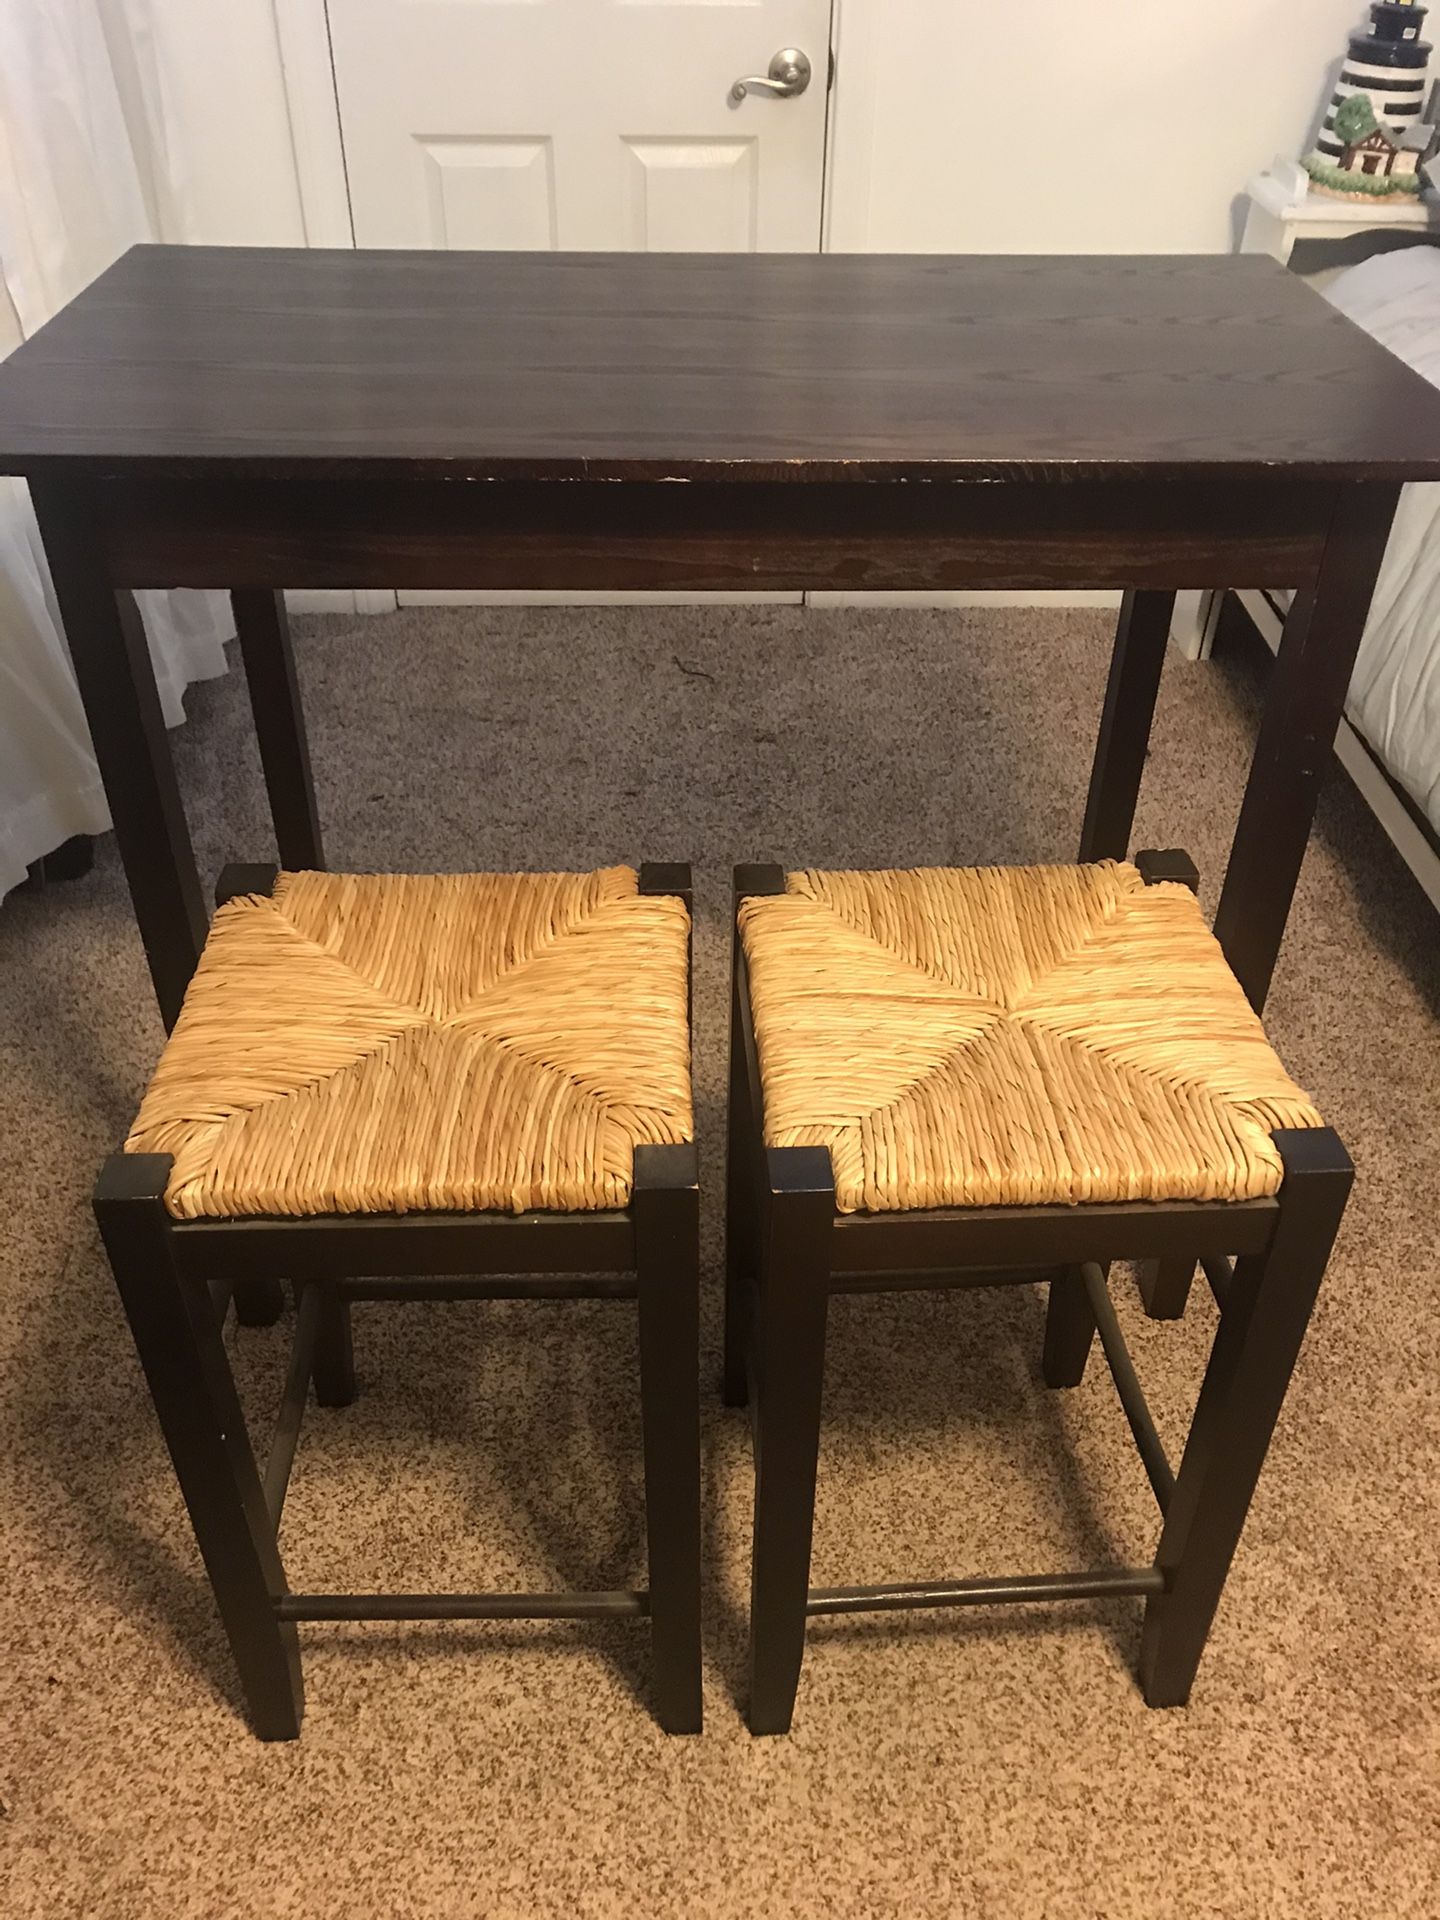 Two seater table and stool chairs